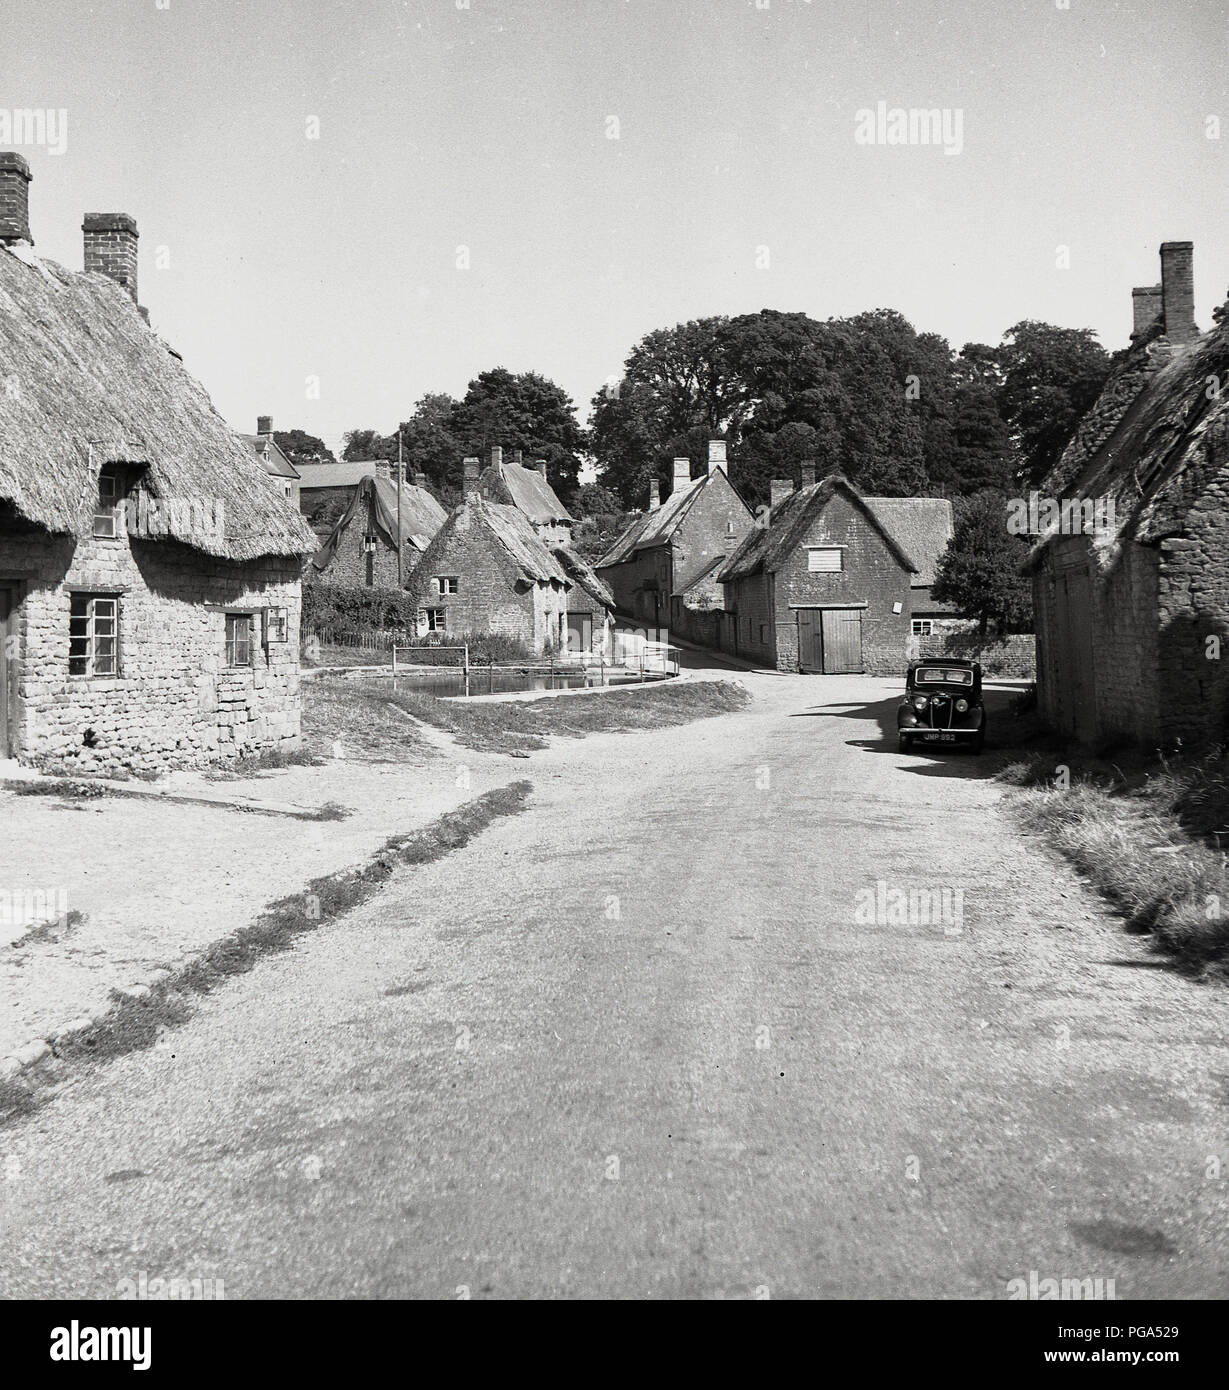 1950s, the quiet rural English village of Wroxton, Oxfordshire, showing old buildings including thatched cottages. For such a tiny village, Wroxton has a rich history and its beauty and uniqueness lies in the fact that it has remained unchanged over the centuries. It has an abbey and duck pond. Stock Photo